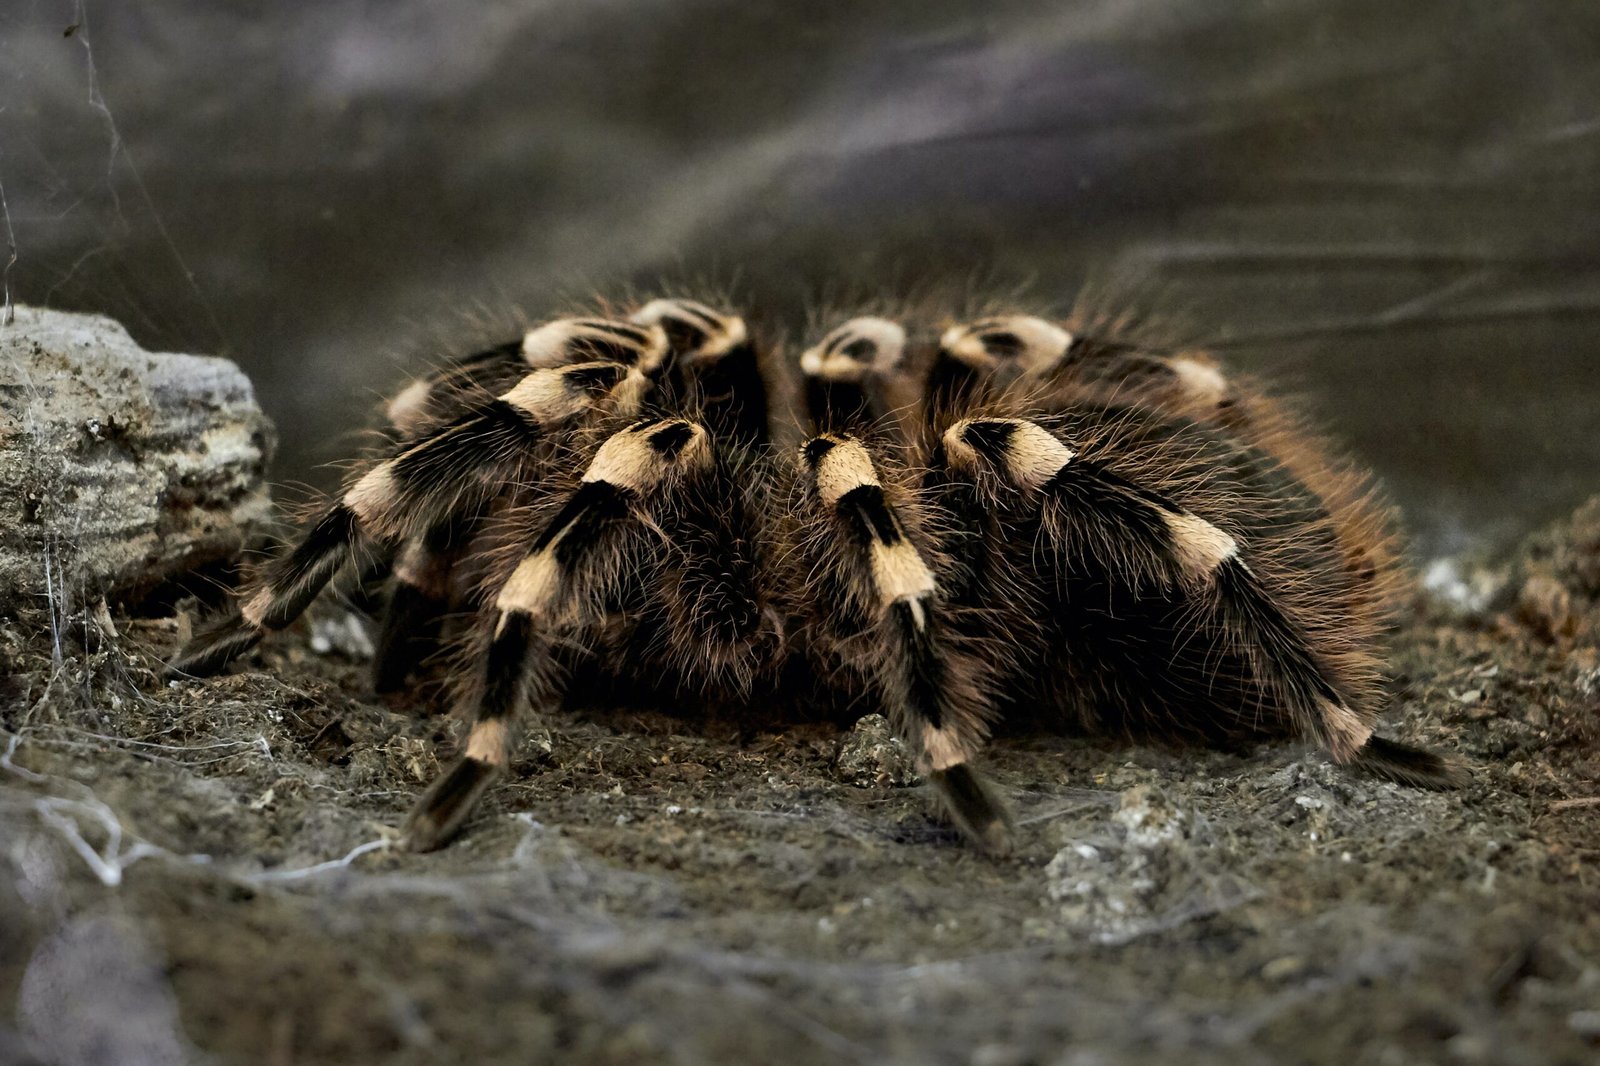 What Is The Feeding Behavior Of The Stunning Goliath Bird-eater Tarantula, And What Prey Items Are Suitable?